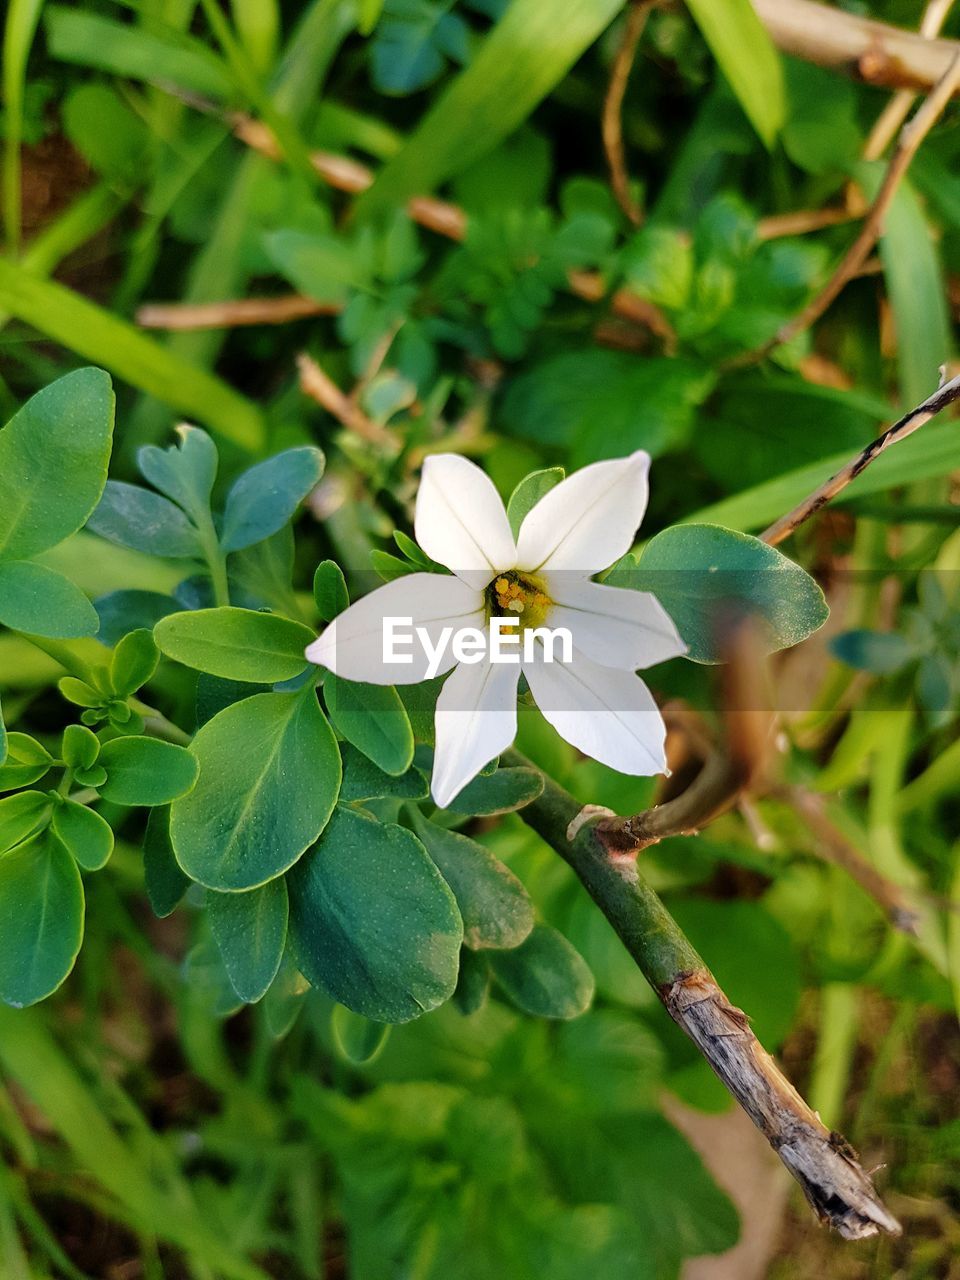 CLOSE-UP OF WHITE FLOWERING PLANT WITH GREEN LEAVES